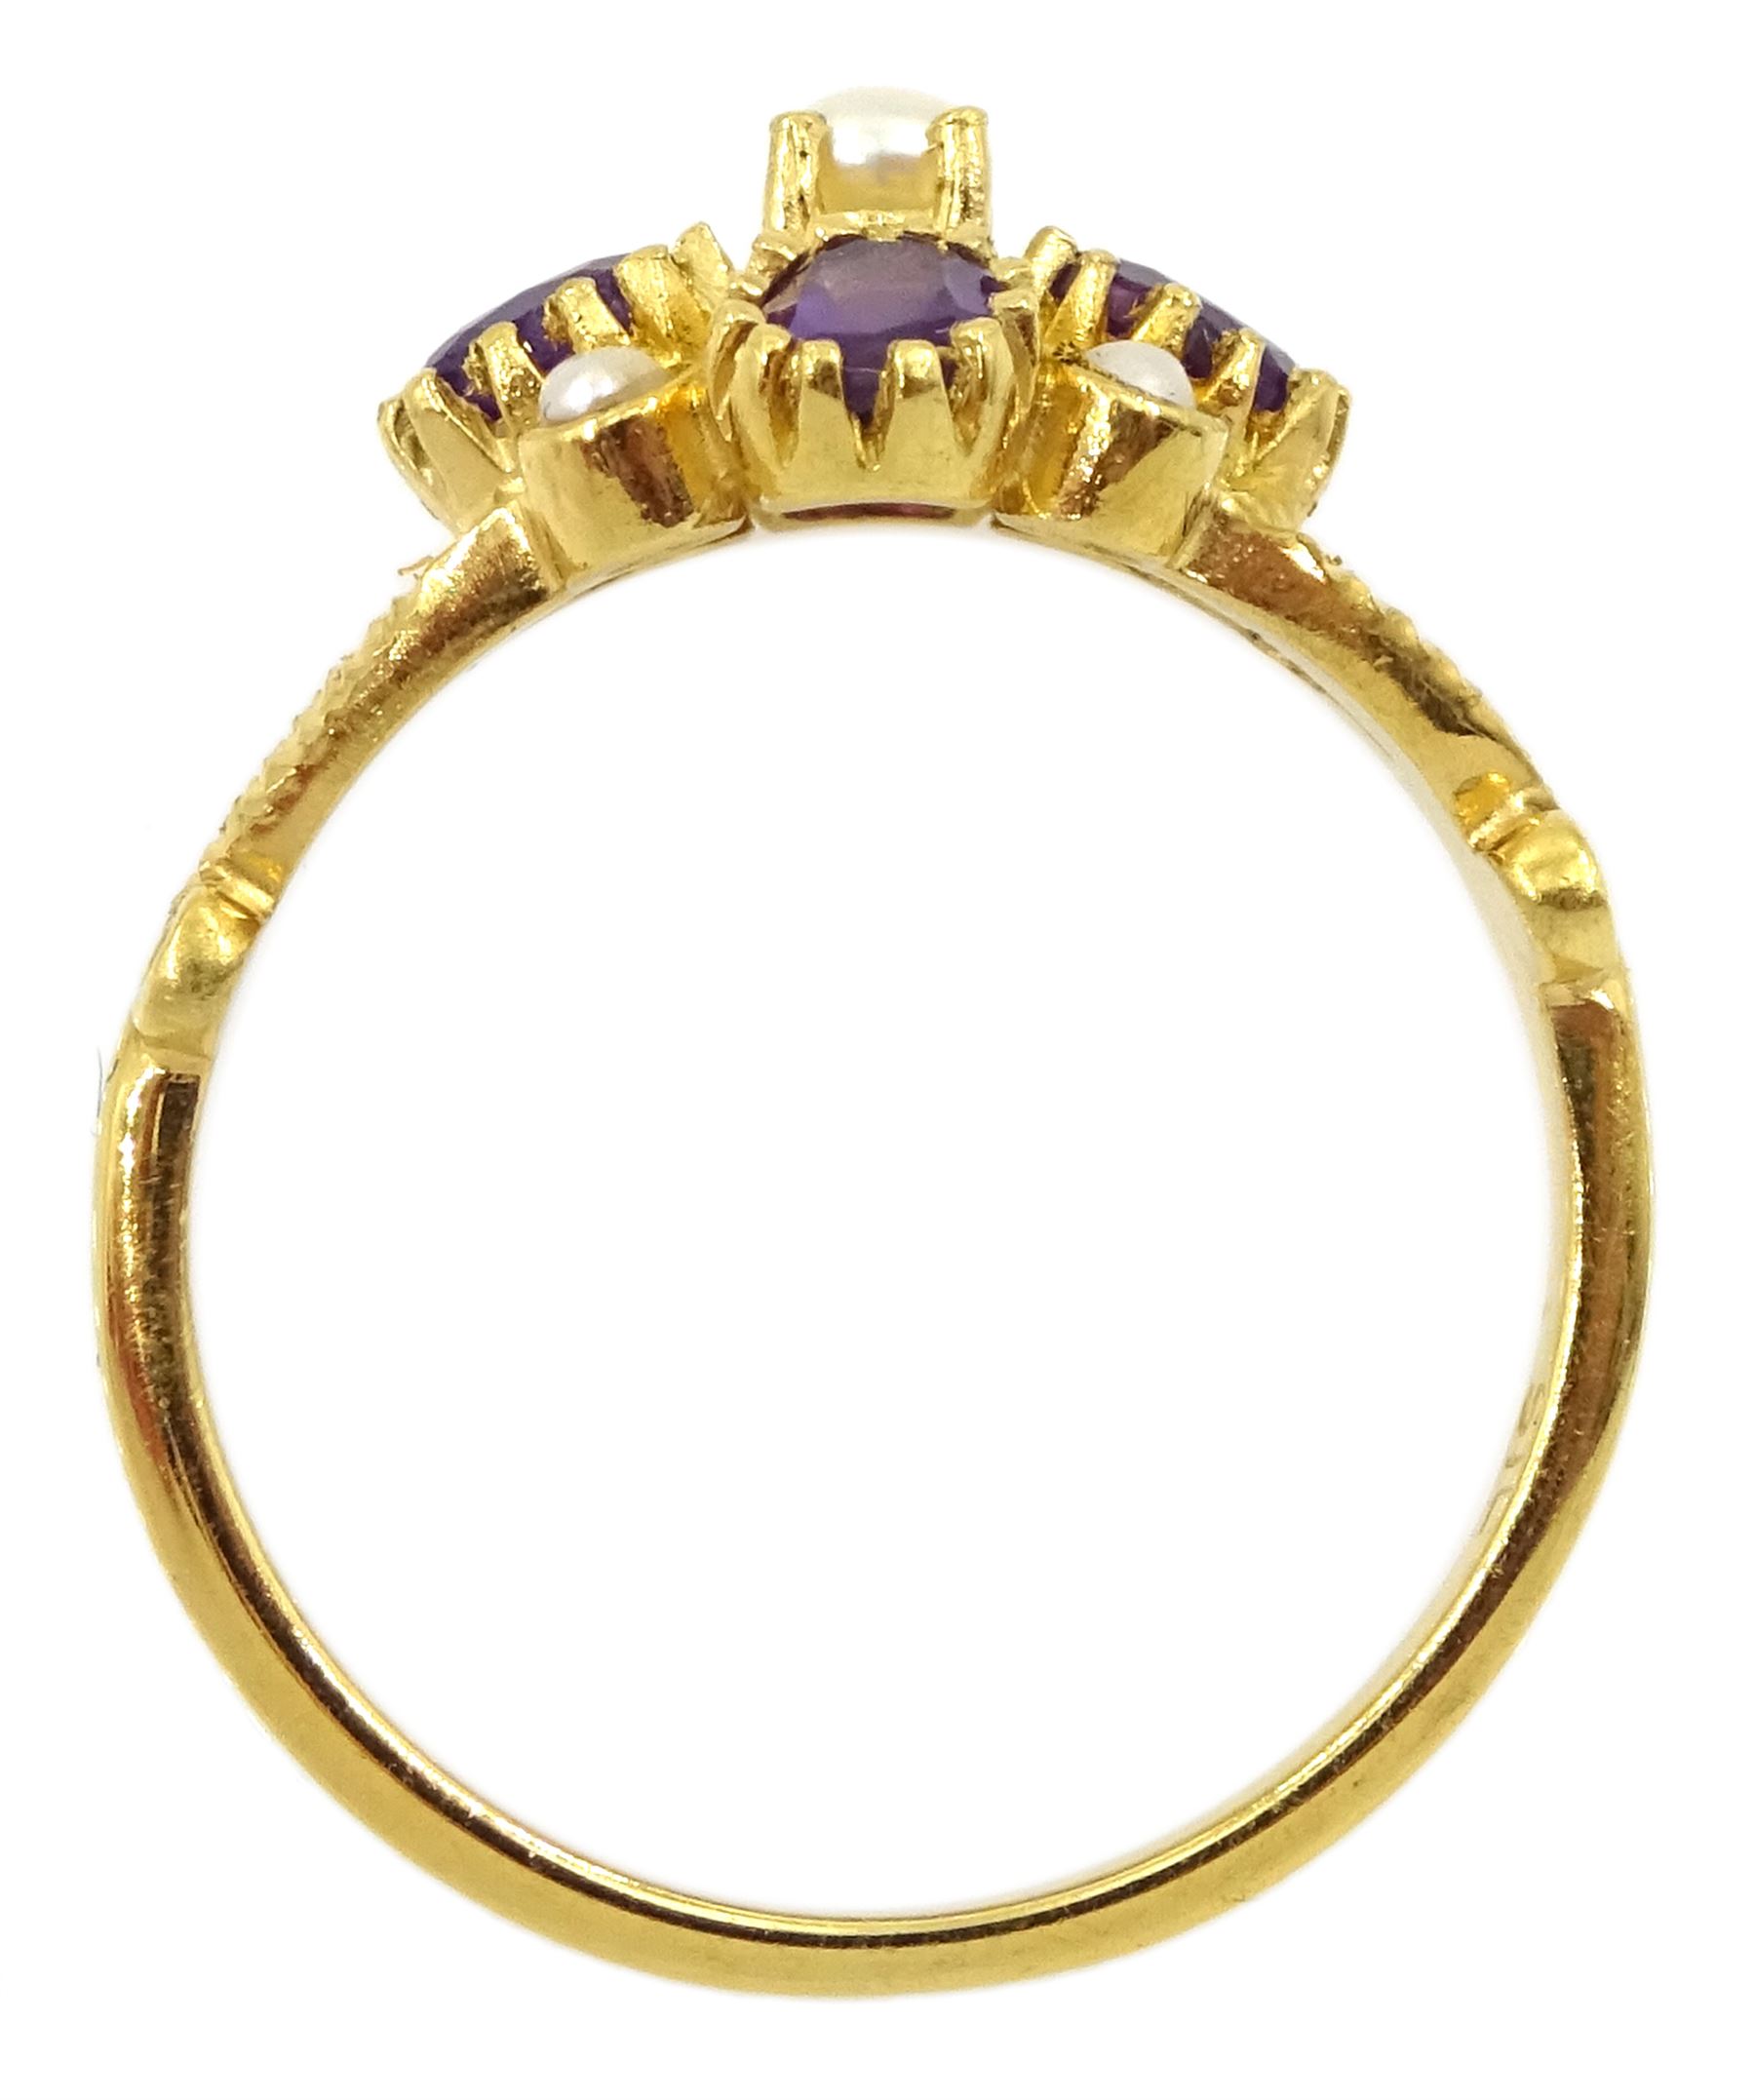 Silver-gilt amethyst and pearl flower cluster ring - Image 4 of 4